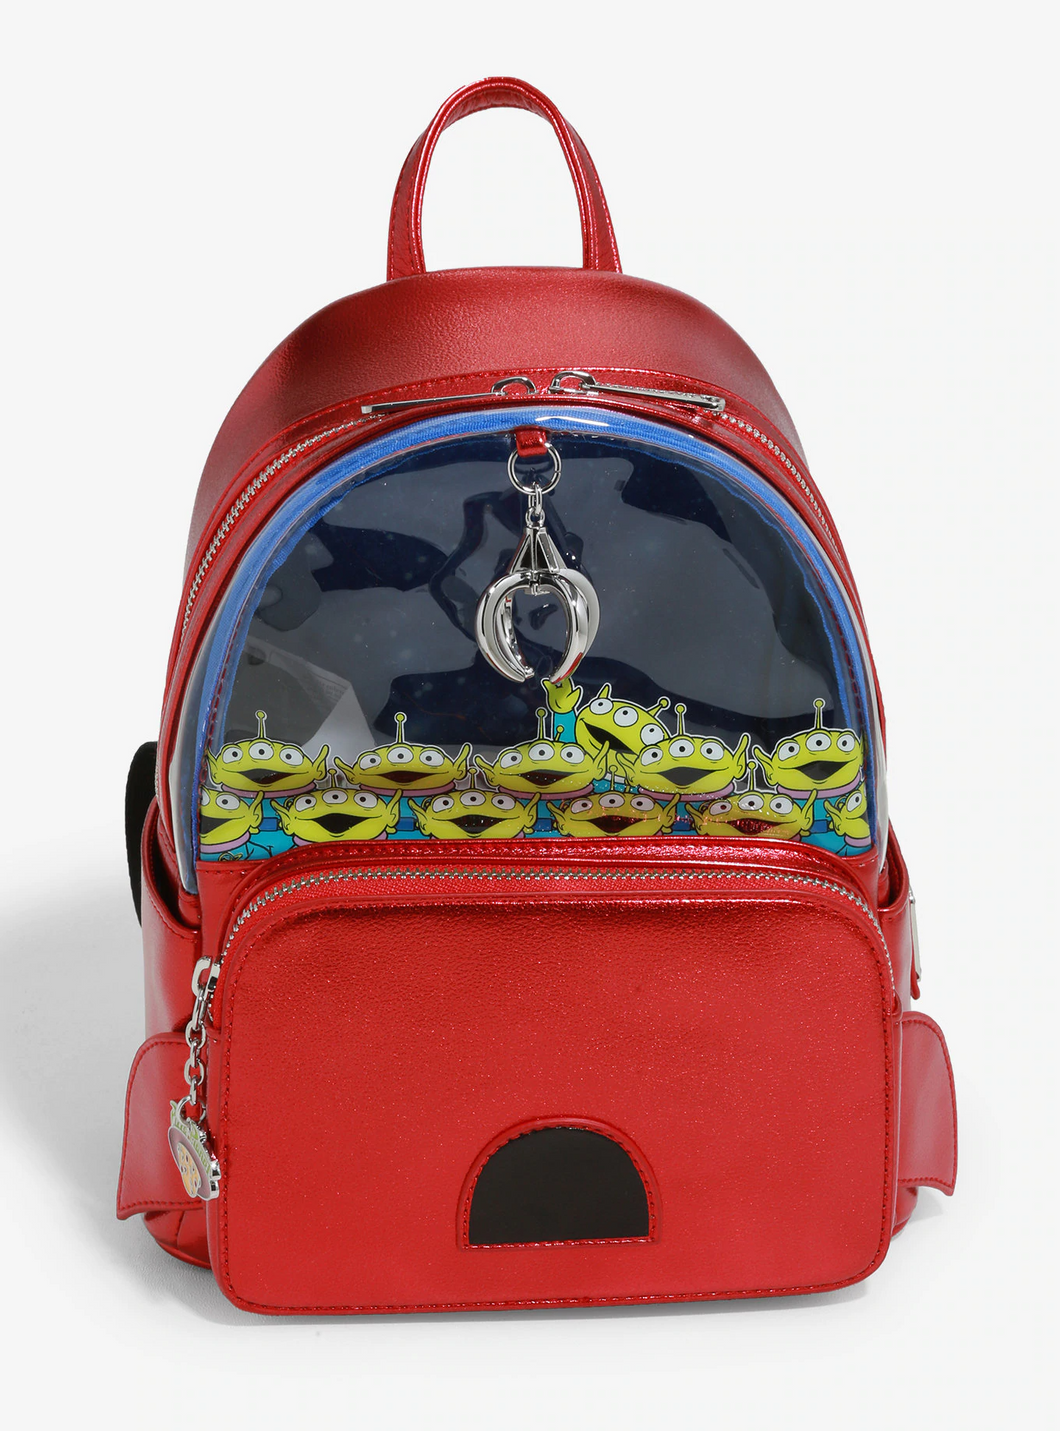 Disney and Pixar's Toy Story Backpack